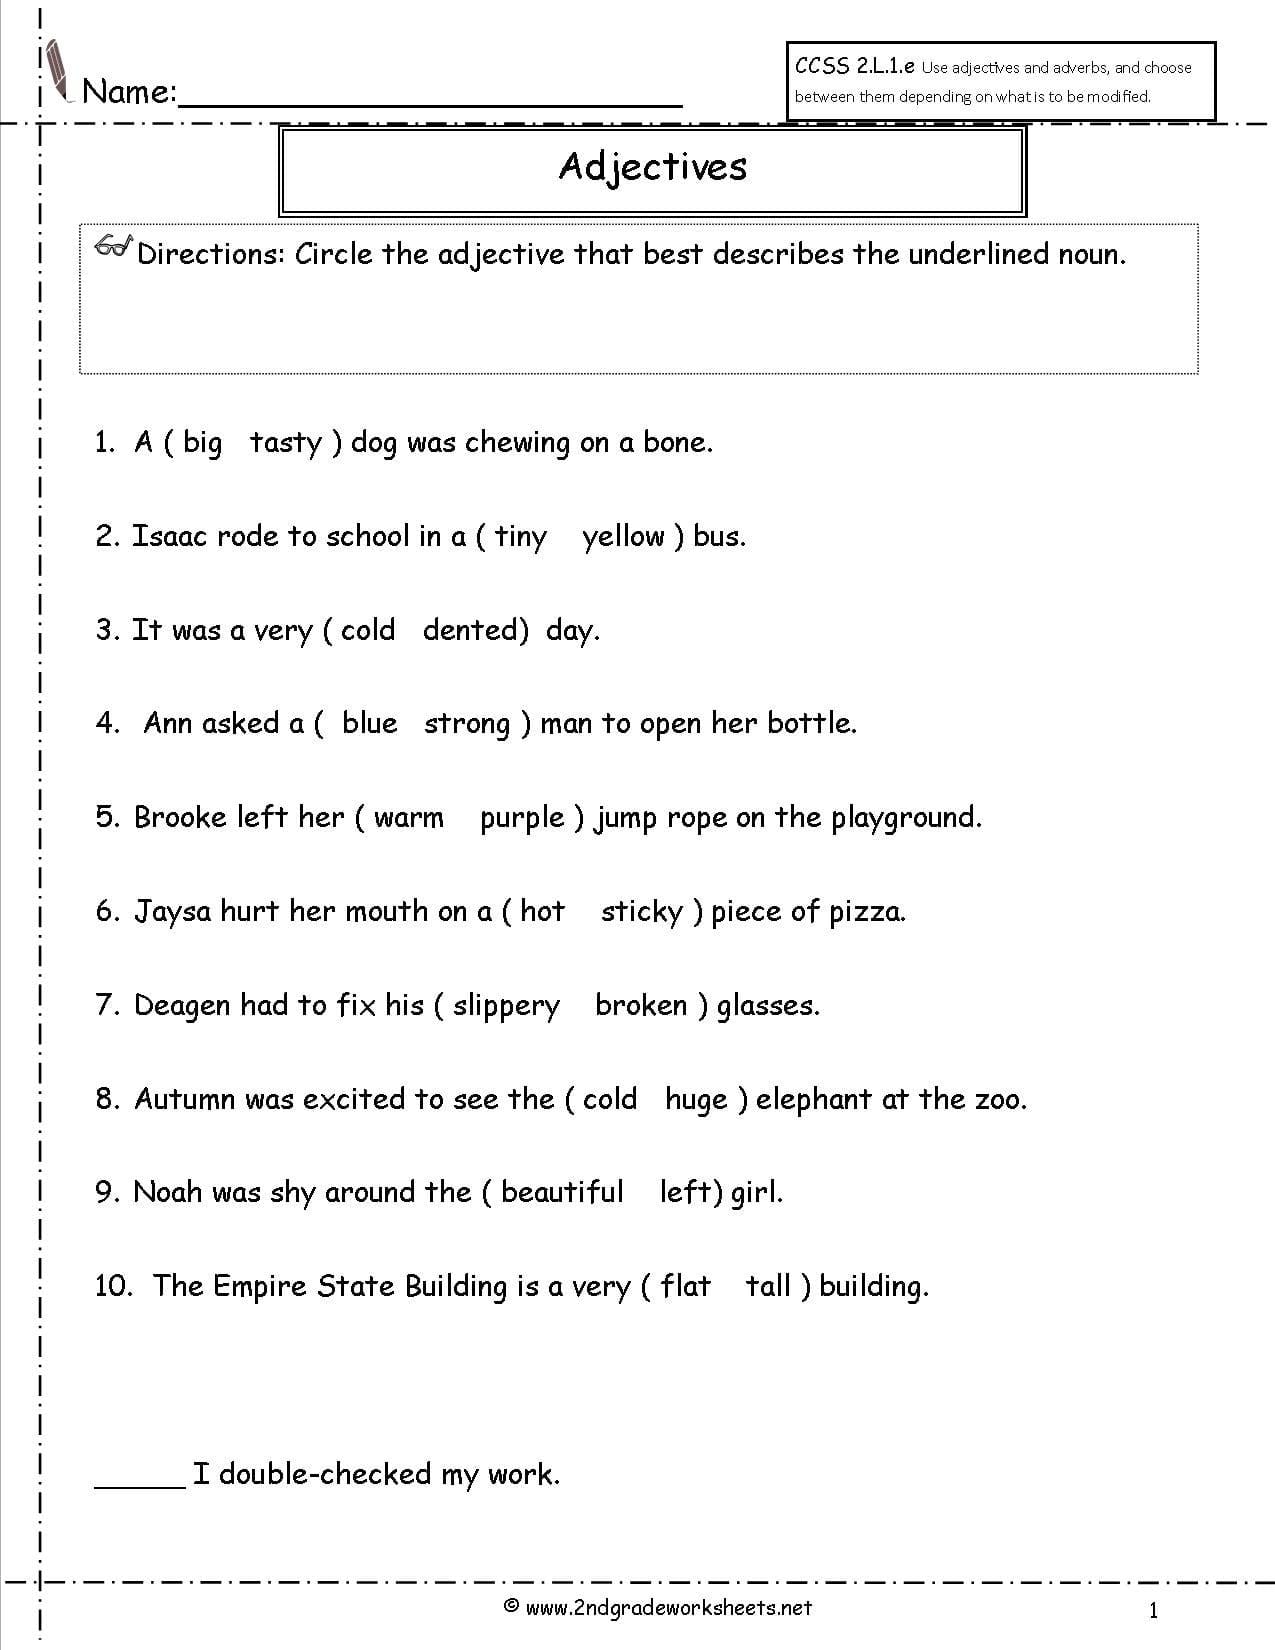 Free Using Adjectives And Adverbs Worksheets Along With Noun Verb Adjective Adverb Worksheet